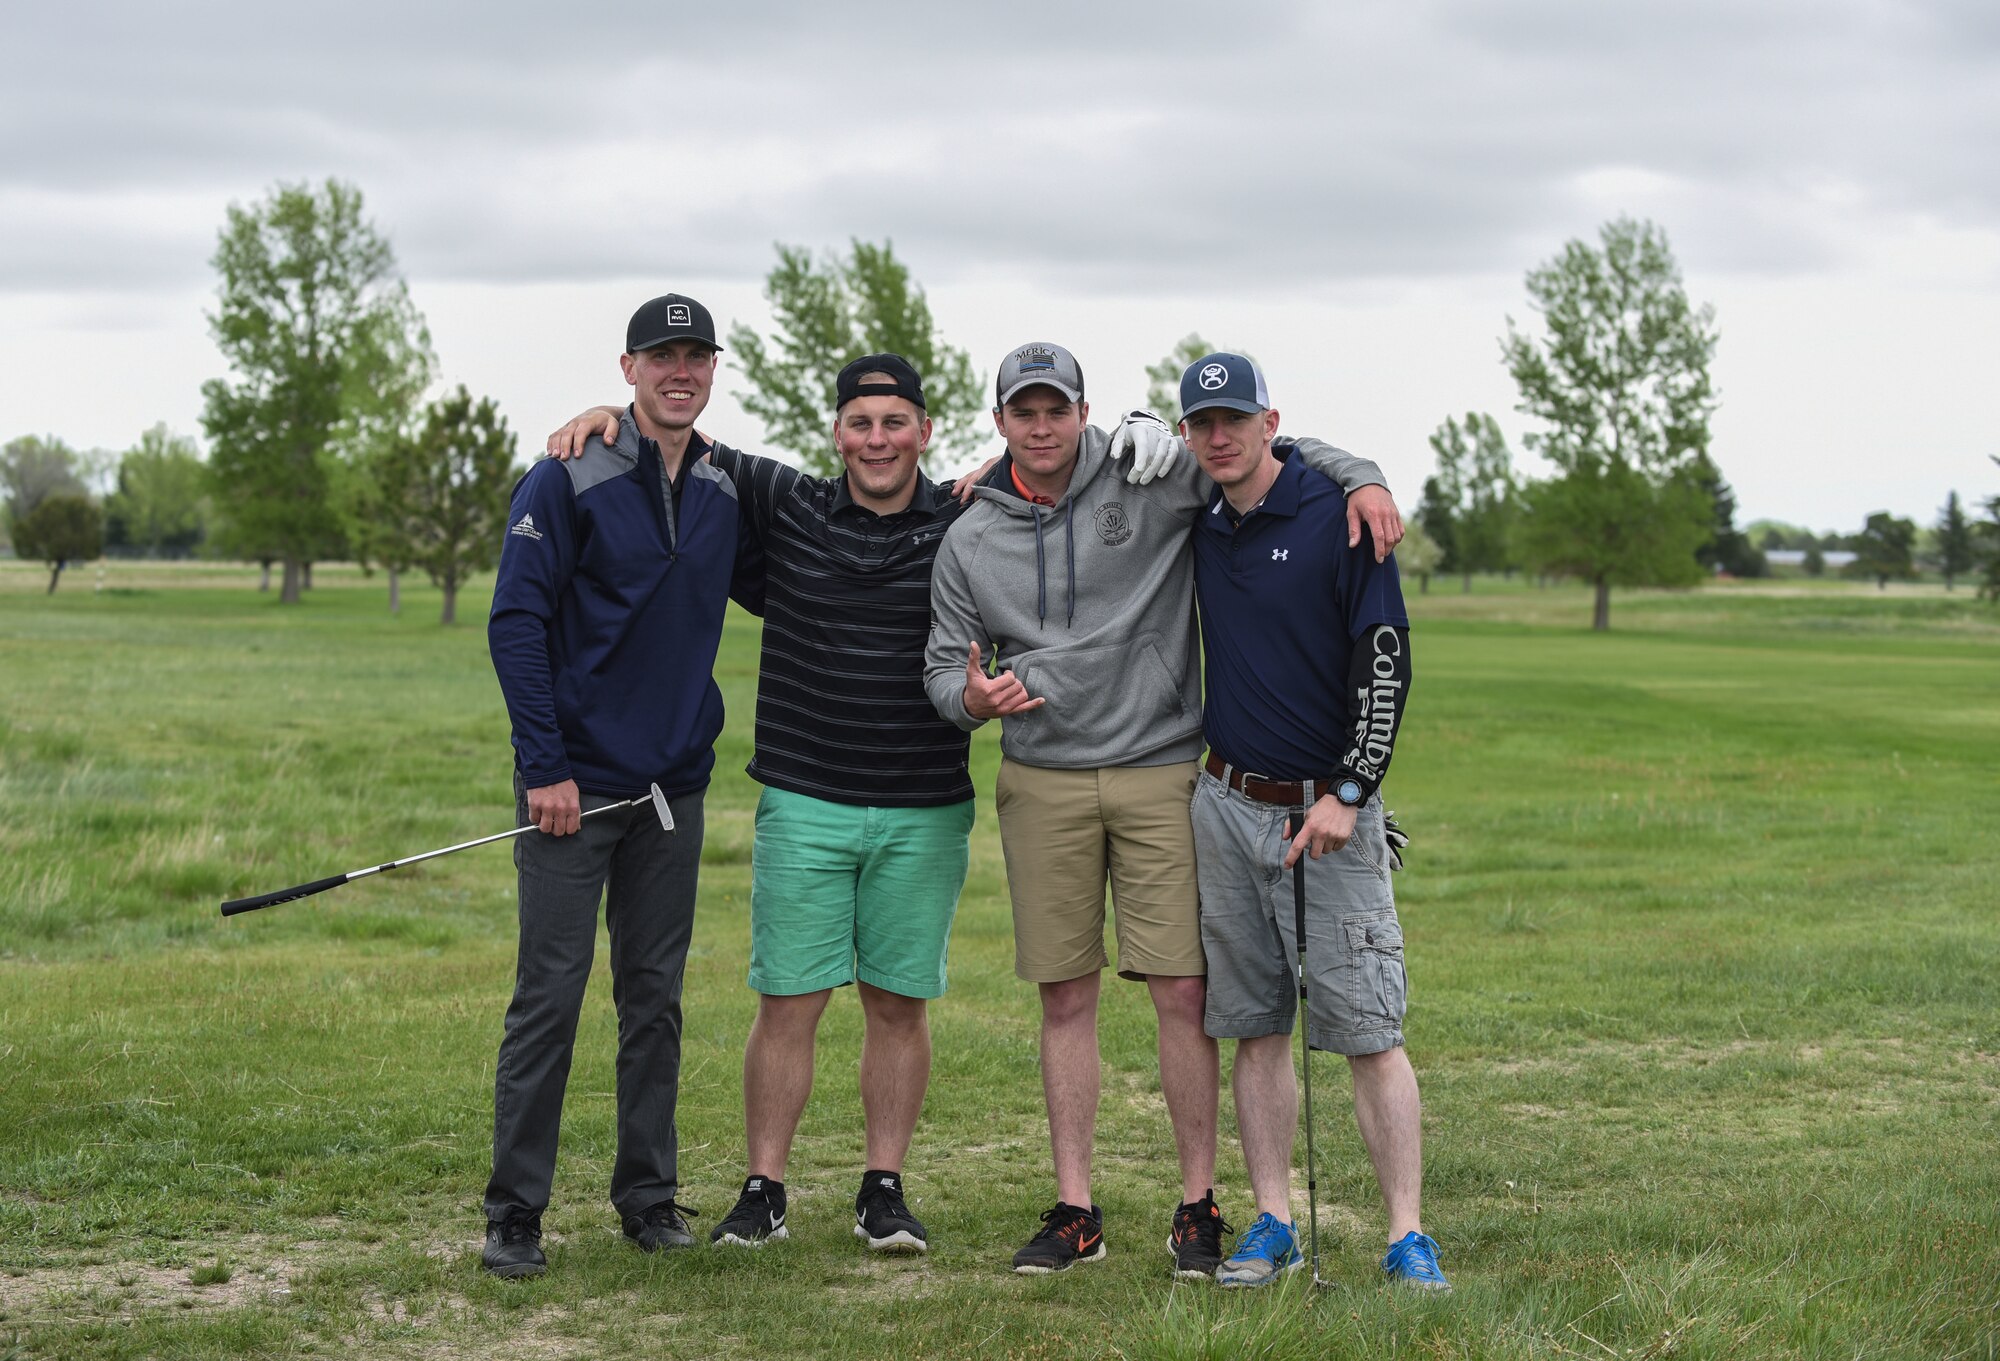 A four-man golf team from the 90th Tactical Response Force, pose for a group photo during the Police Week Security Forces golf tournament, May 18, 2018, on F.E. Warren Air Force Base, Wyo. Teams came out for a relaxed round of golf to end Police Week with a good time. In 1962, President John F. Kennedy signed a proclamation which designated May 15 as Peace Officers Memorial Day and the week in which that date falls as Police Week. People all across the United States participate in various events which honor those who have paid the ultimate sacrifice. (U.S. Air Force photo by Airman 1st Class Braydon Williams)